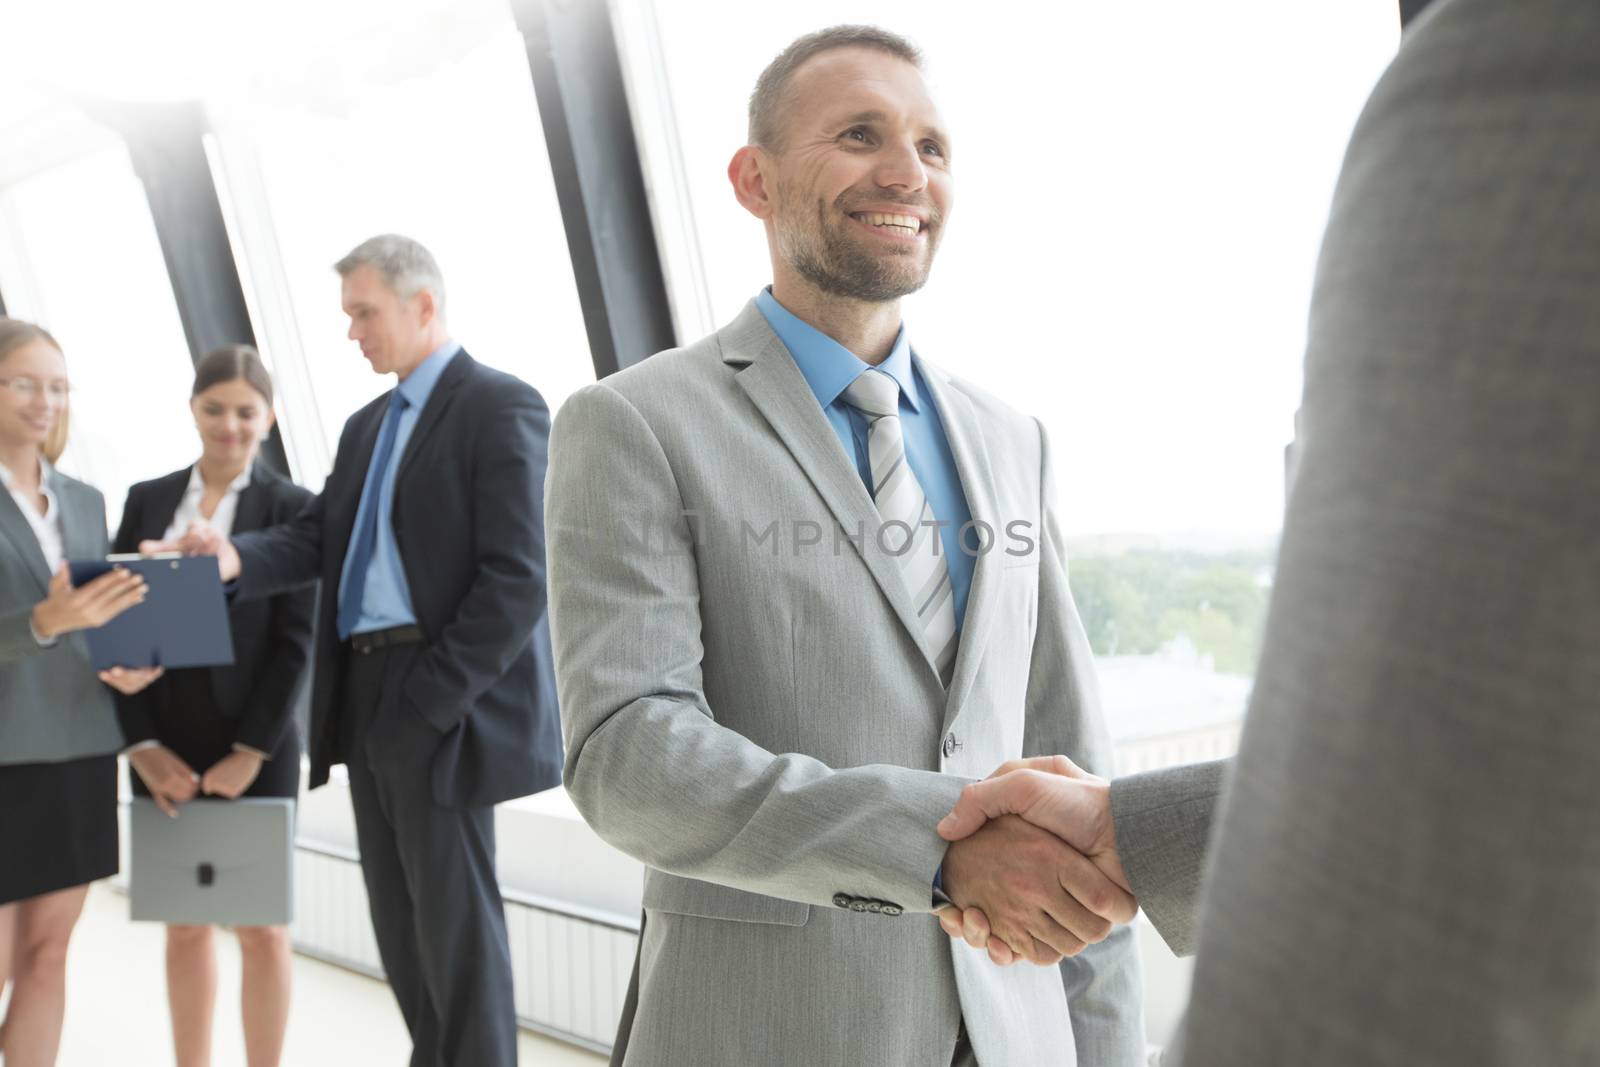 Business people shaking hands and smiling, finishing up a meeting in office